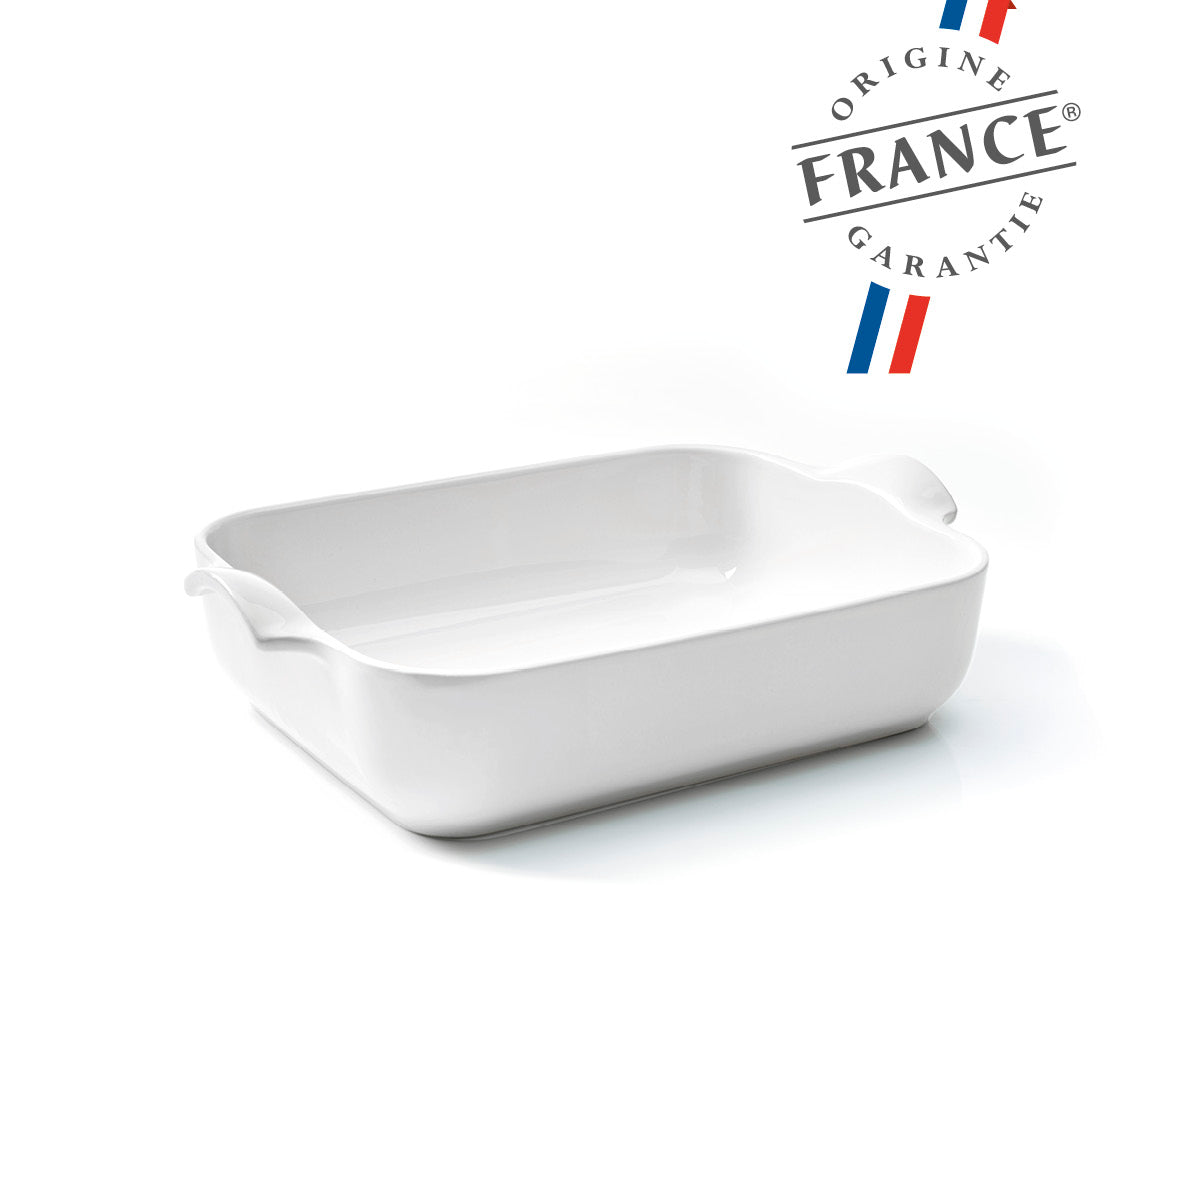 Ceramic oven dish - Made in France - 2.5L - 4-5 people